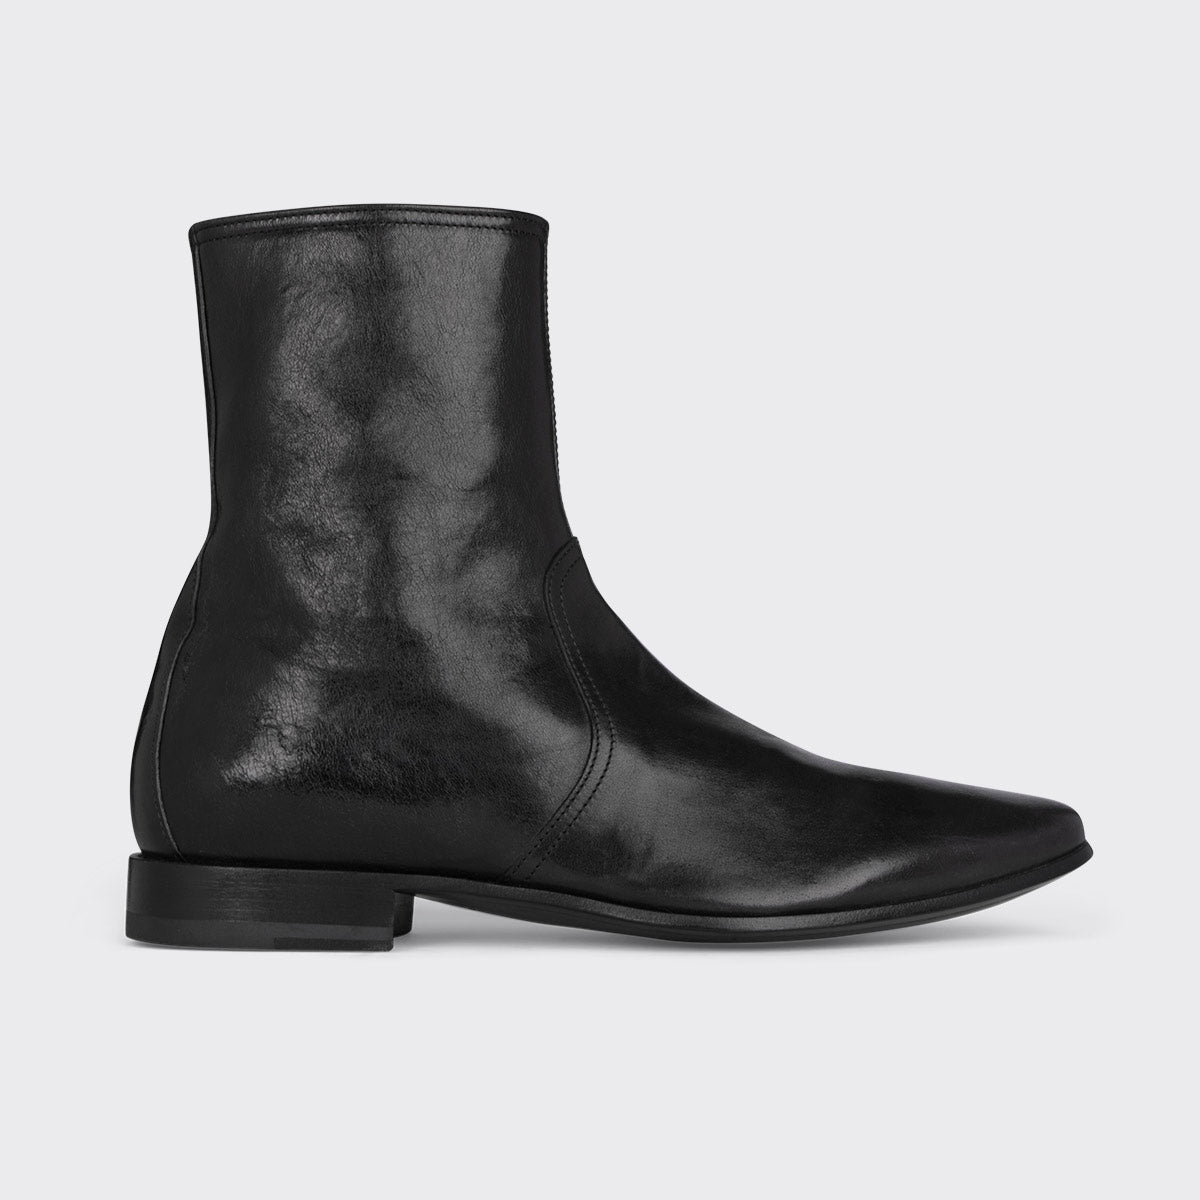 400 boots for men in black kangaroo leather — PIERRE HARDY